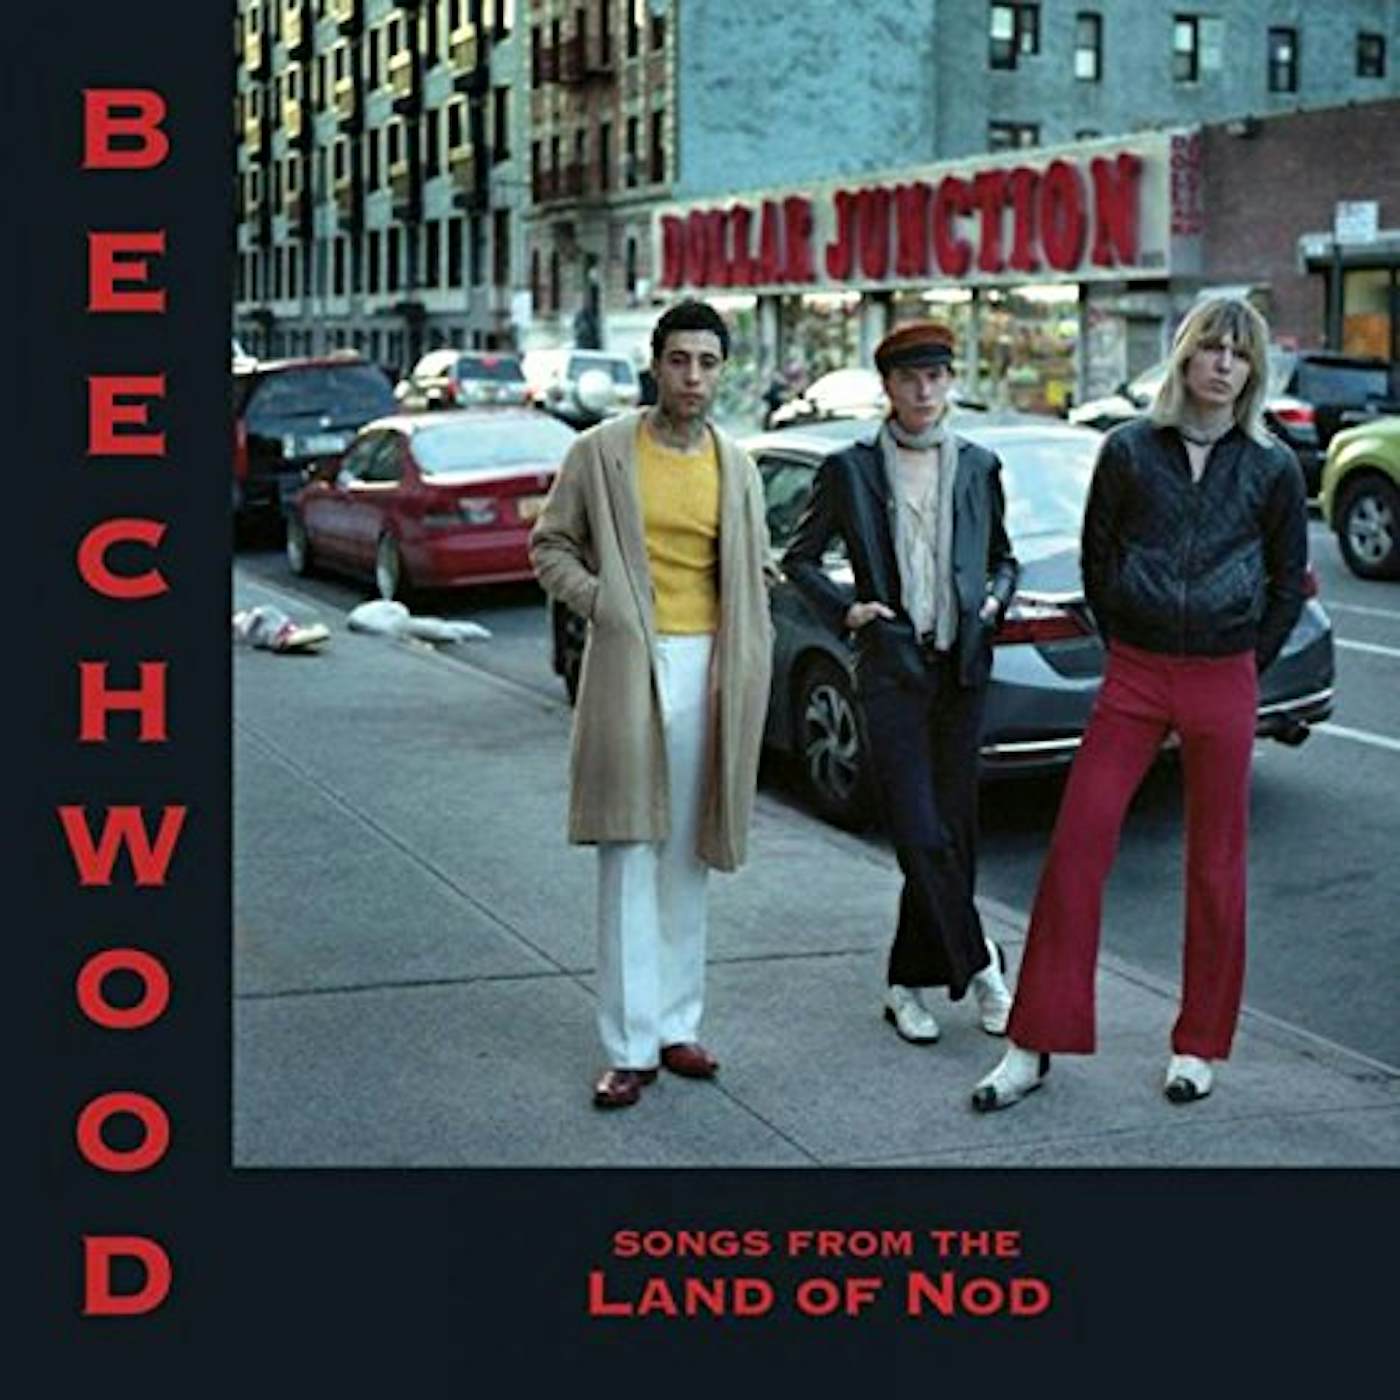 Beechwood SONGS FROM THE LAND OF NOD CD